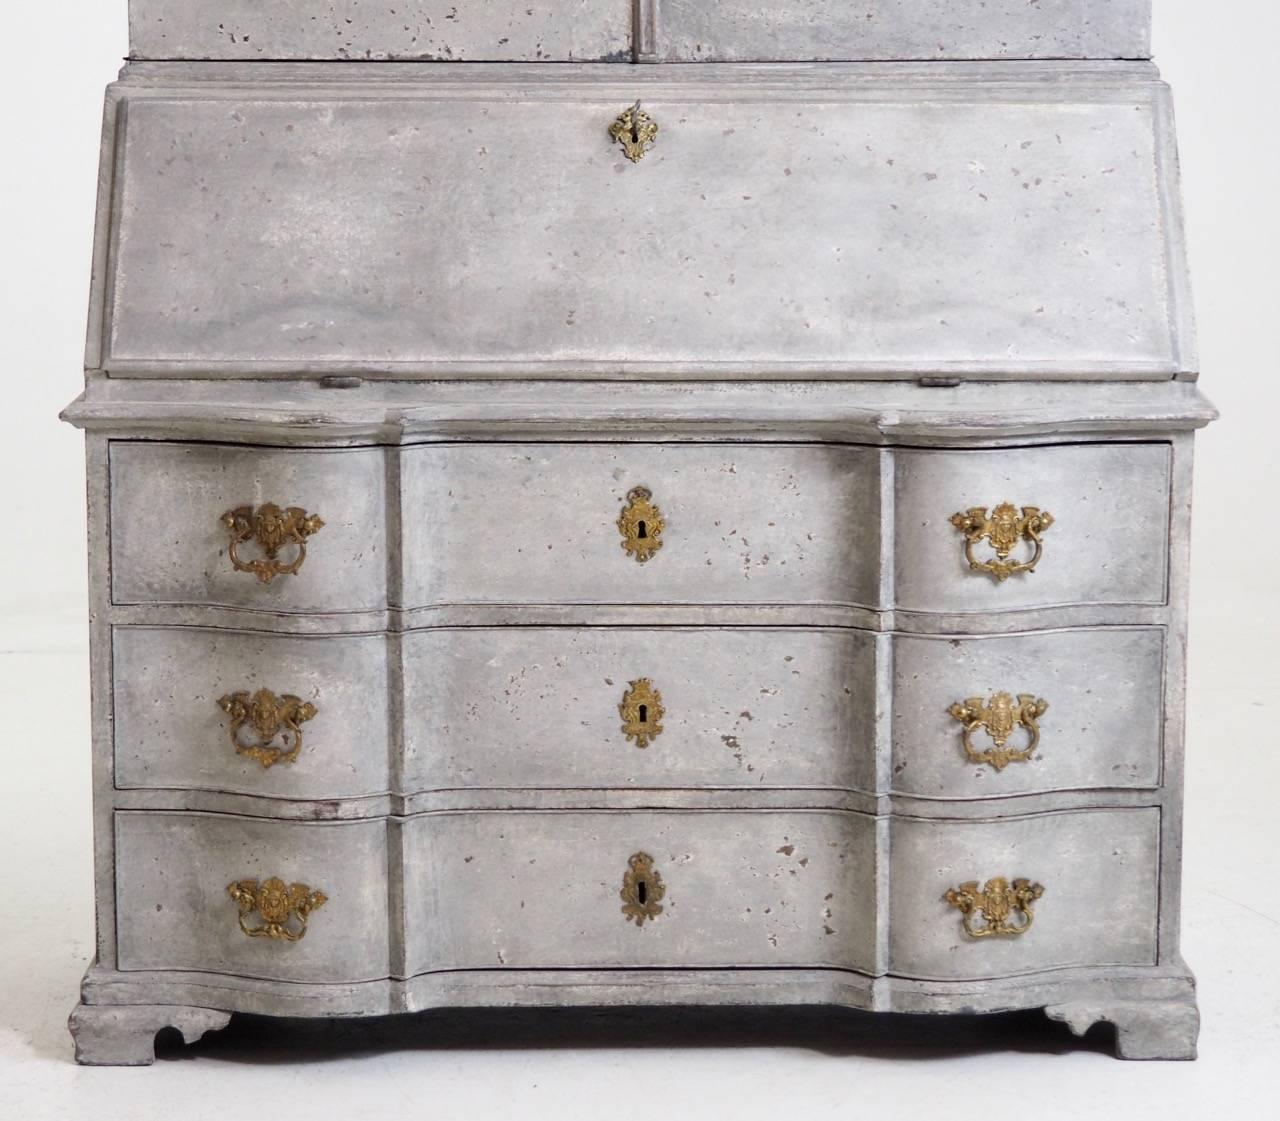 Important and beautiful Scandinavian two-parts bureau, with original key and lock, circa 1750. The bureau is in a beautiful grey outside color, in contacts to the white inside color. The hardware is absolutely stunning, with finely carved royal-like